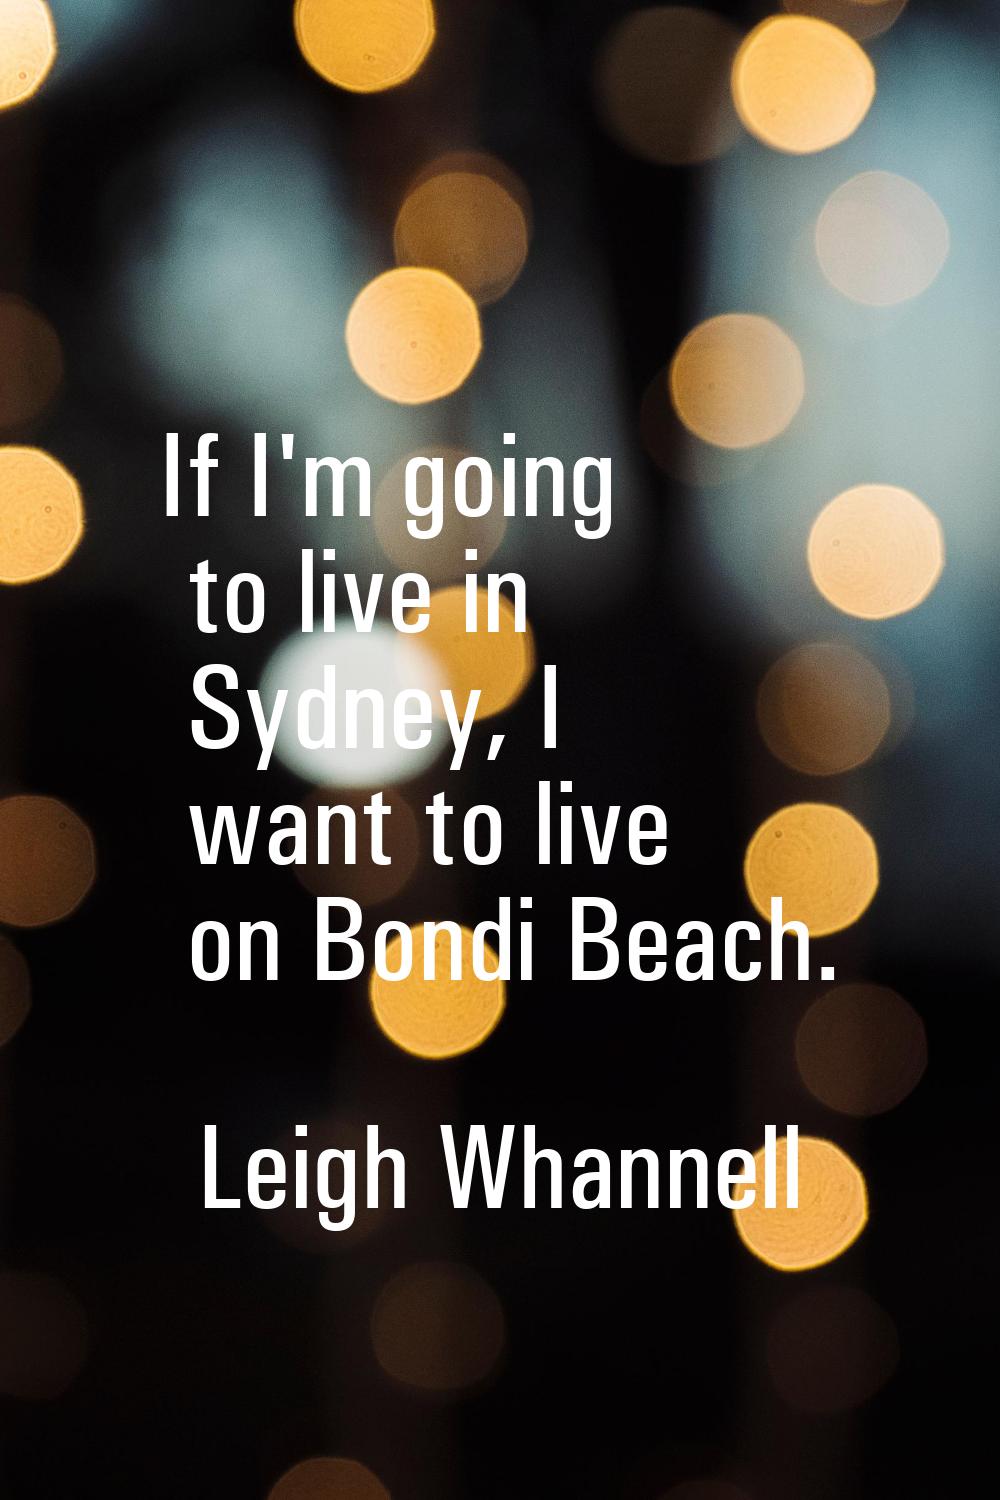 If I'm going to live in Sydney, I want to live on Bondi Beach.